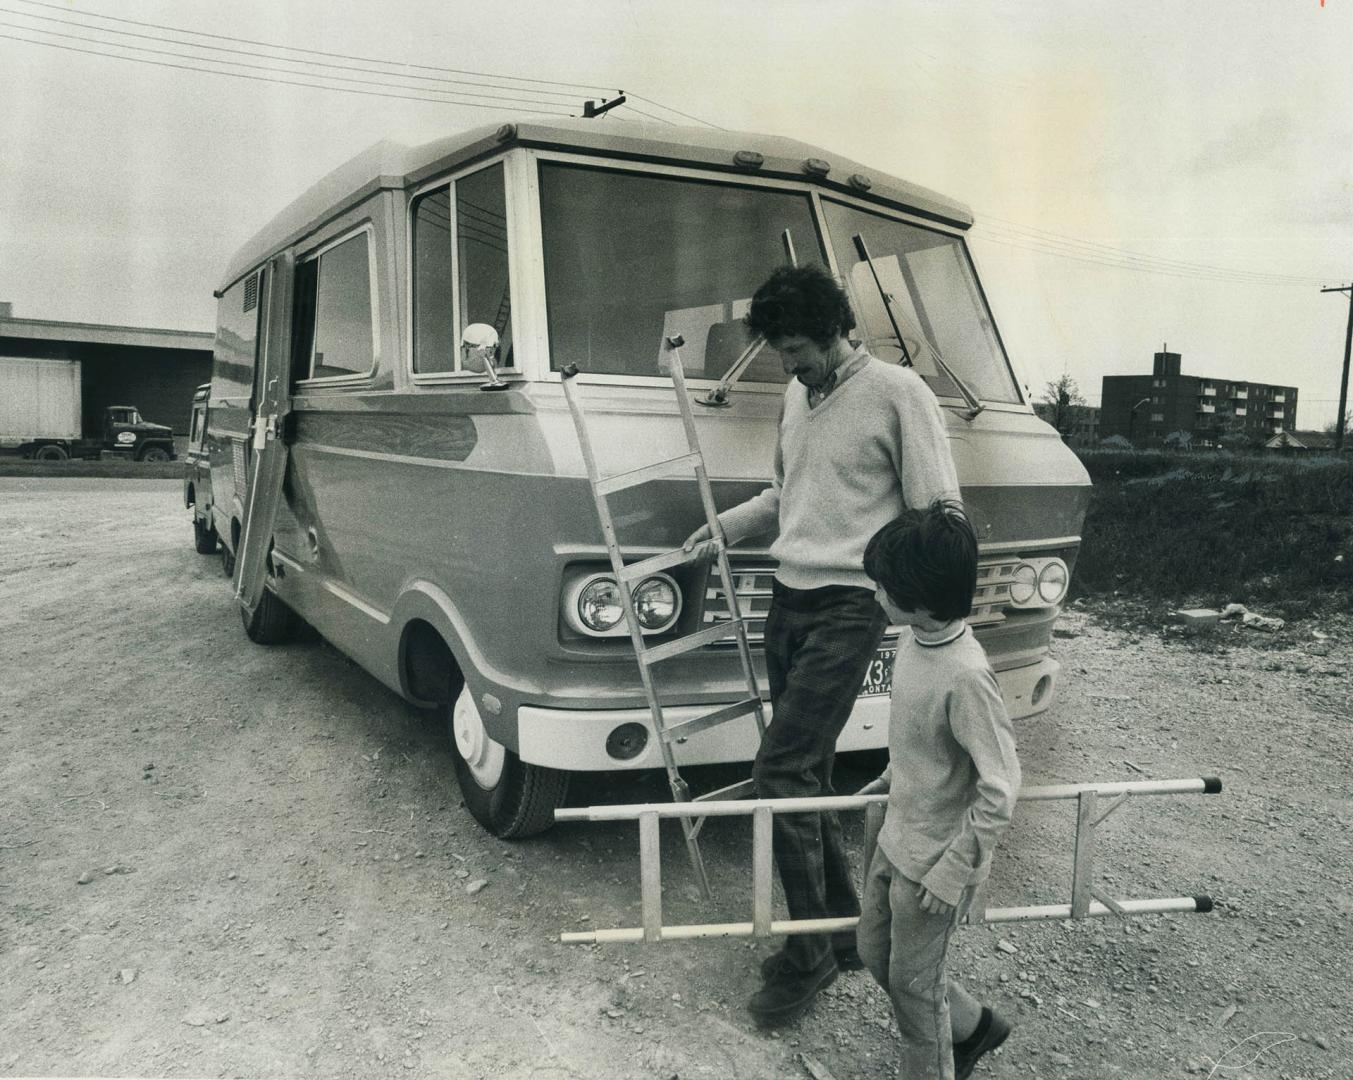 Home on wheels is residence and studio of Canadian filmmaker Christopher Chapman and his son Julian, 8